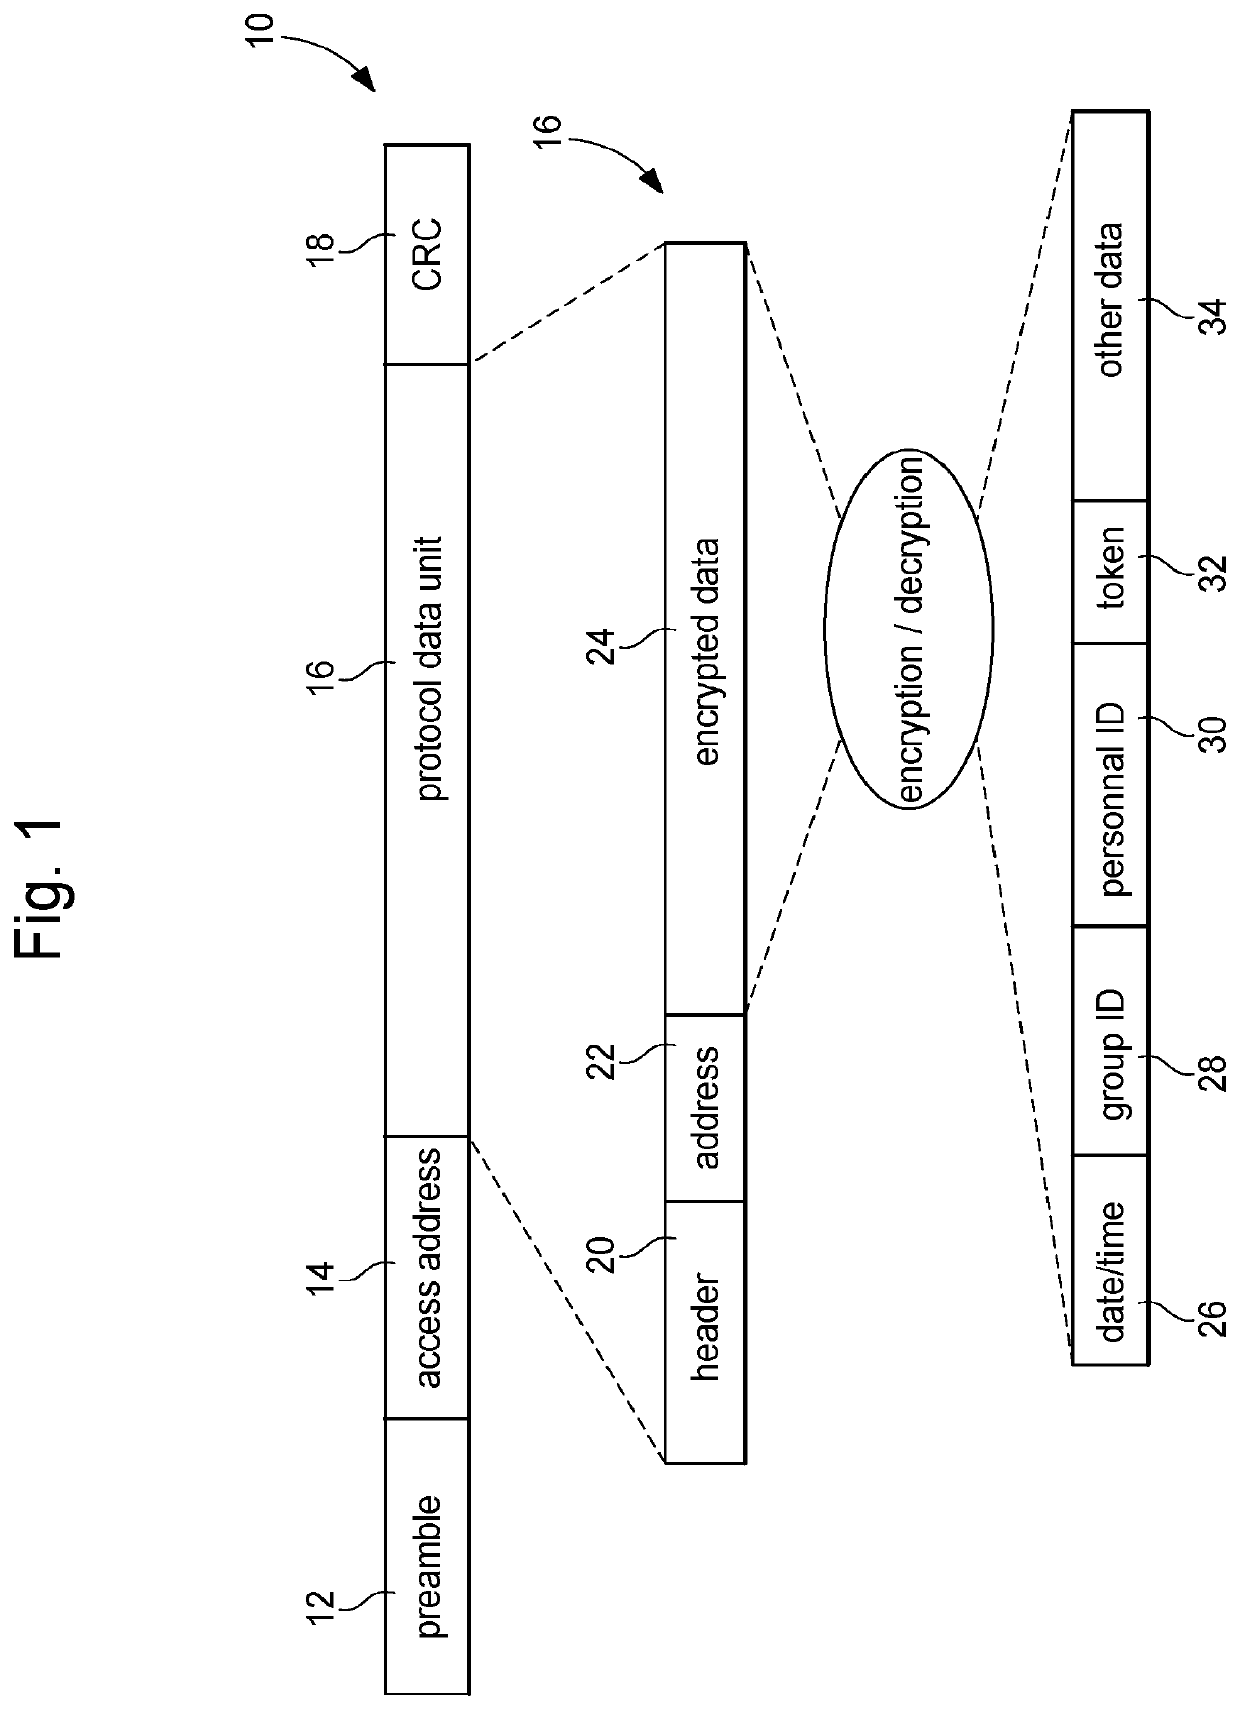 Method for monitoring or tracking between mobile devices